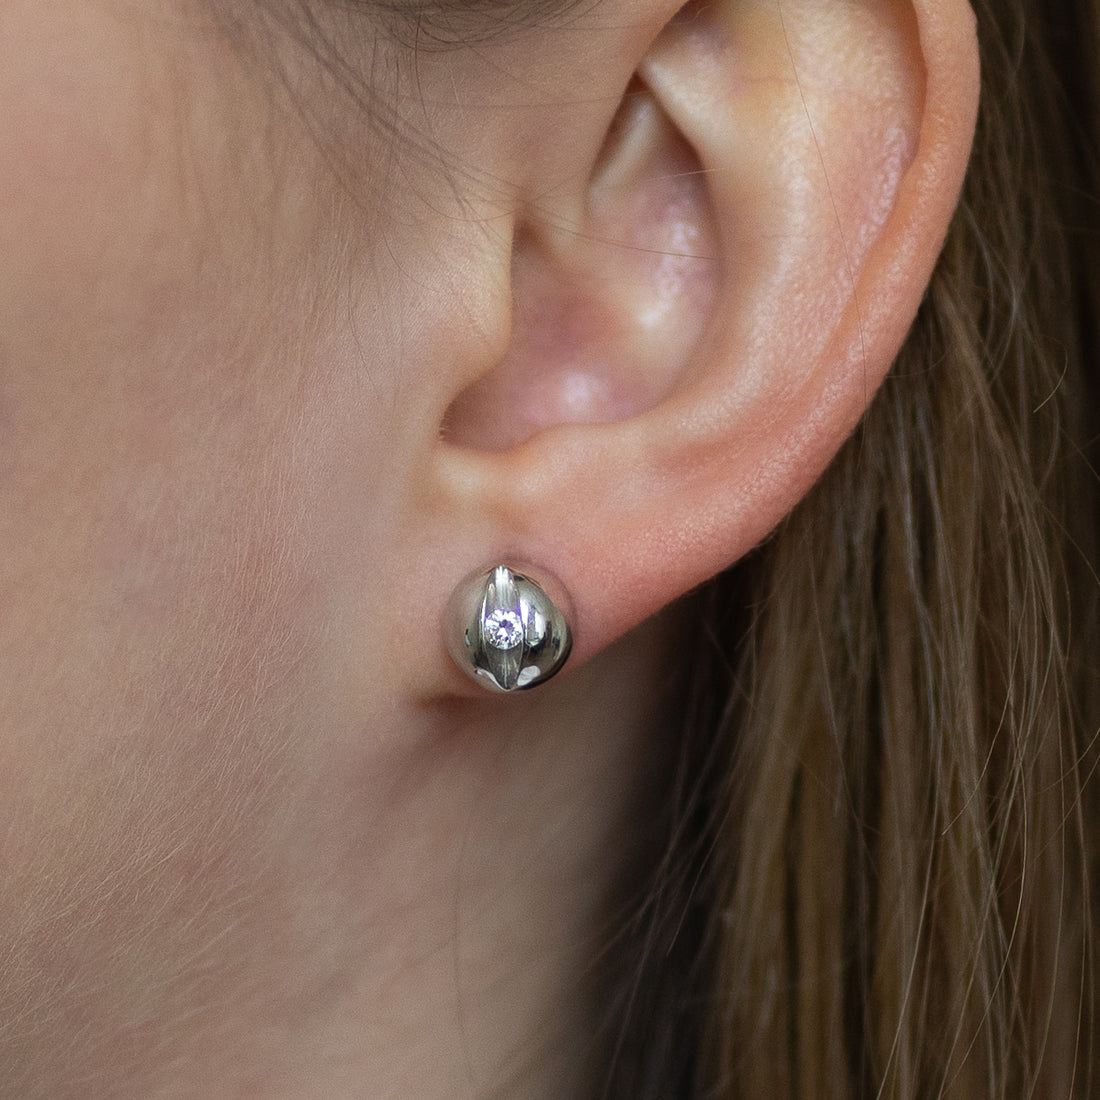 White Gold Stud Earrings with Diamonds